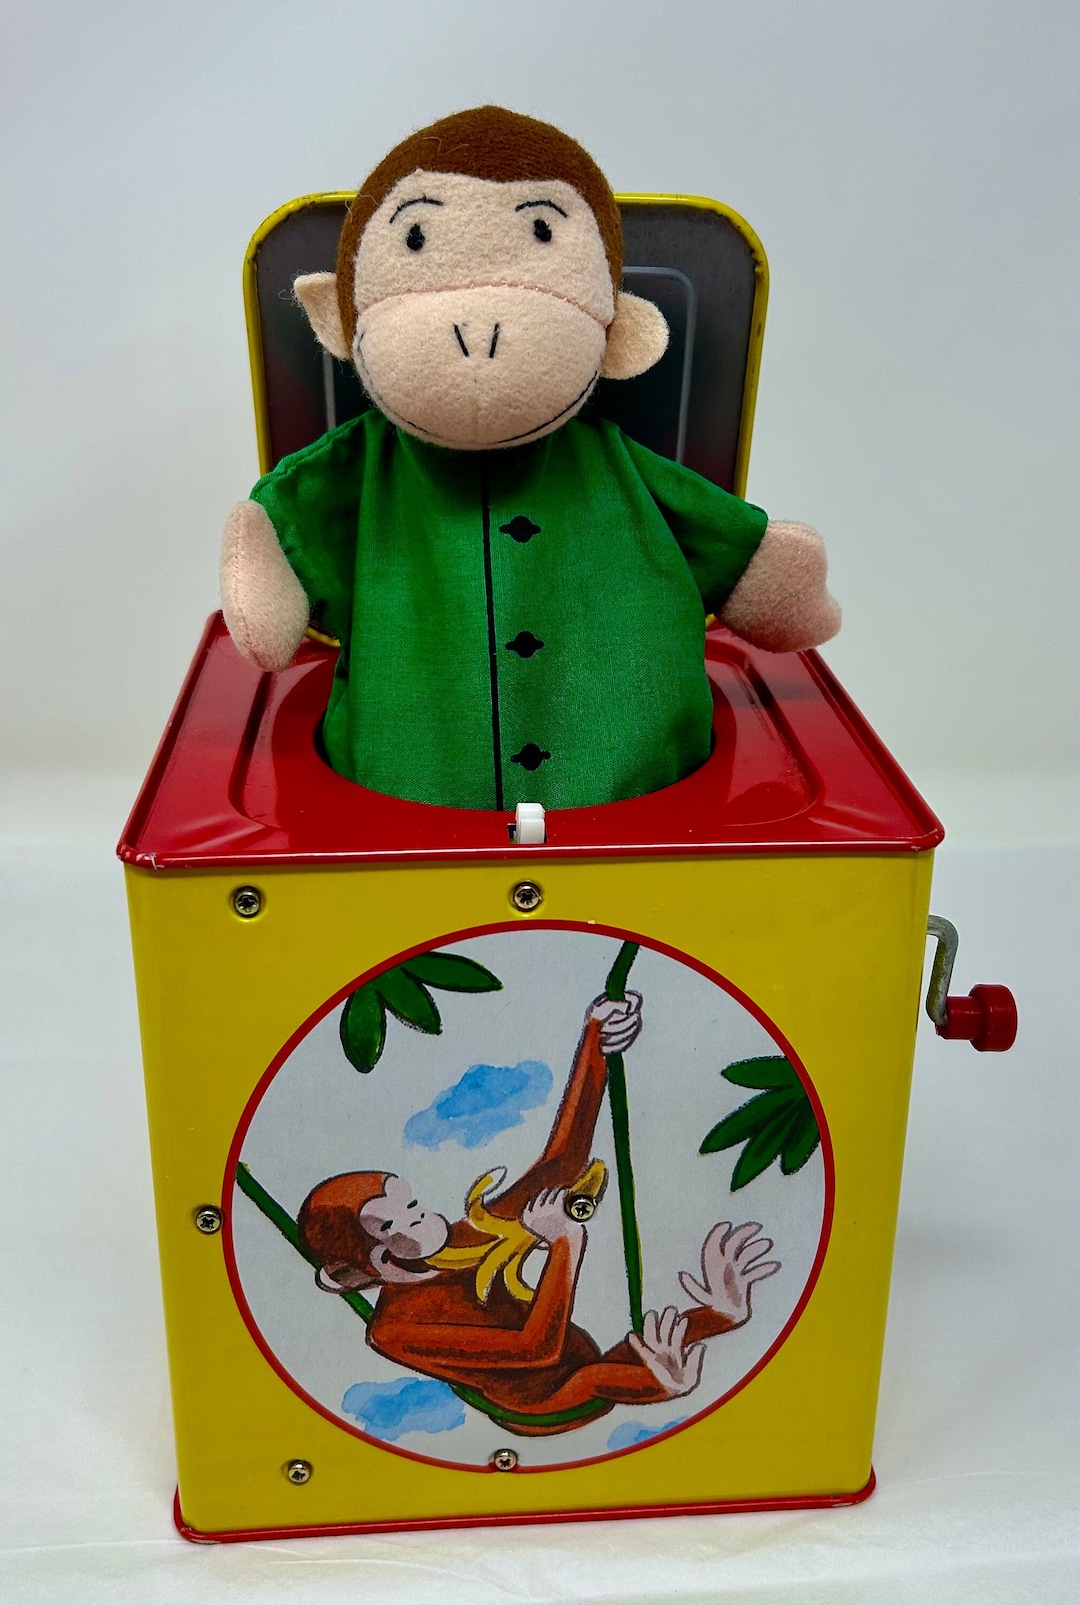 Vintage 1995 Curious George Jack-in-the-box Toy Pop up - Etsy